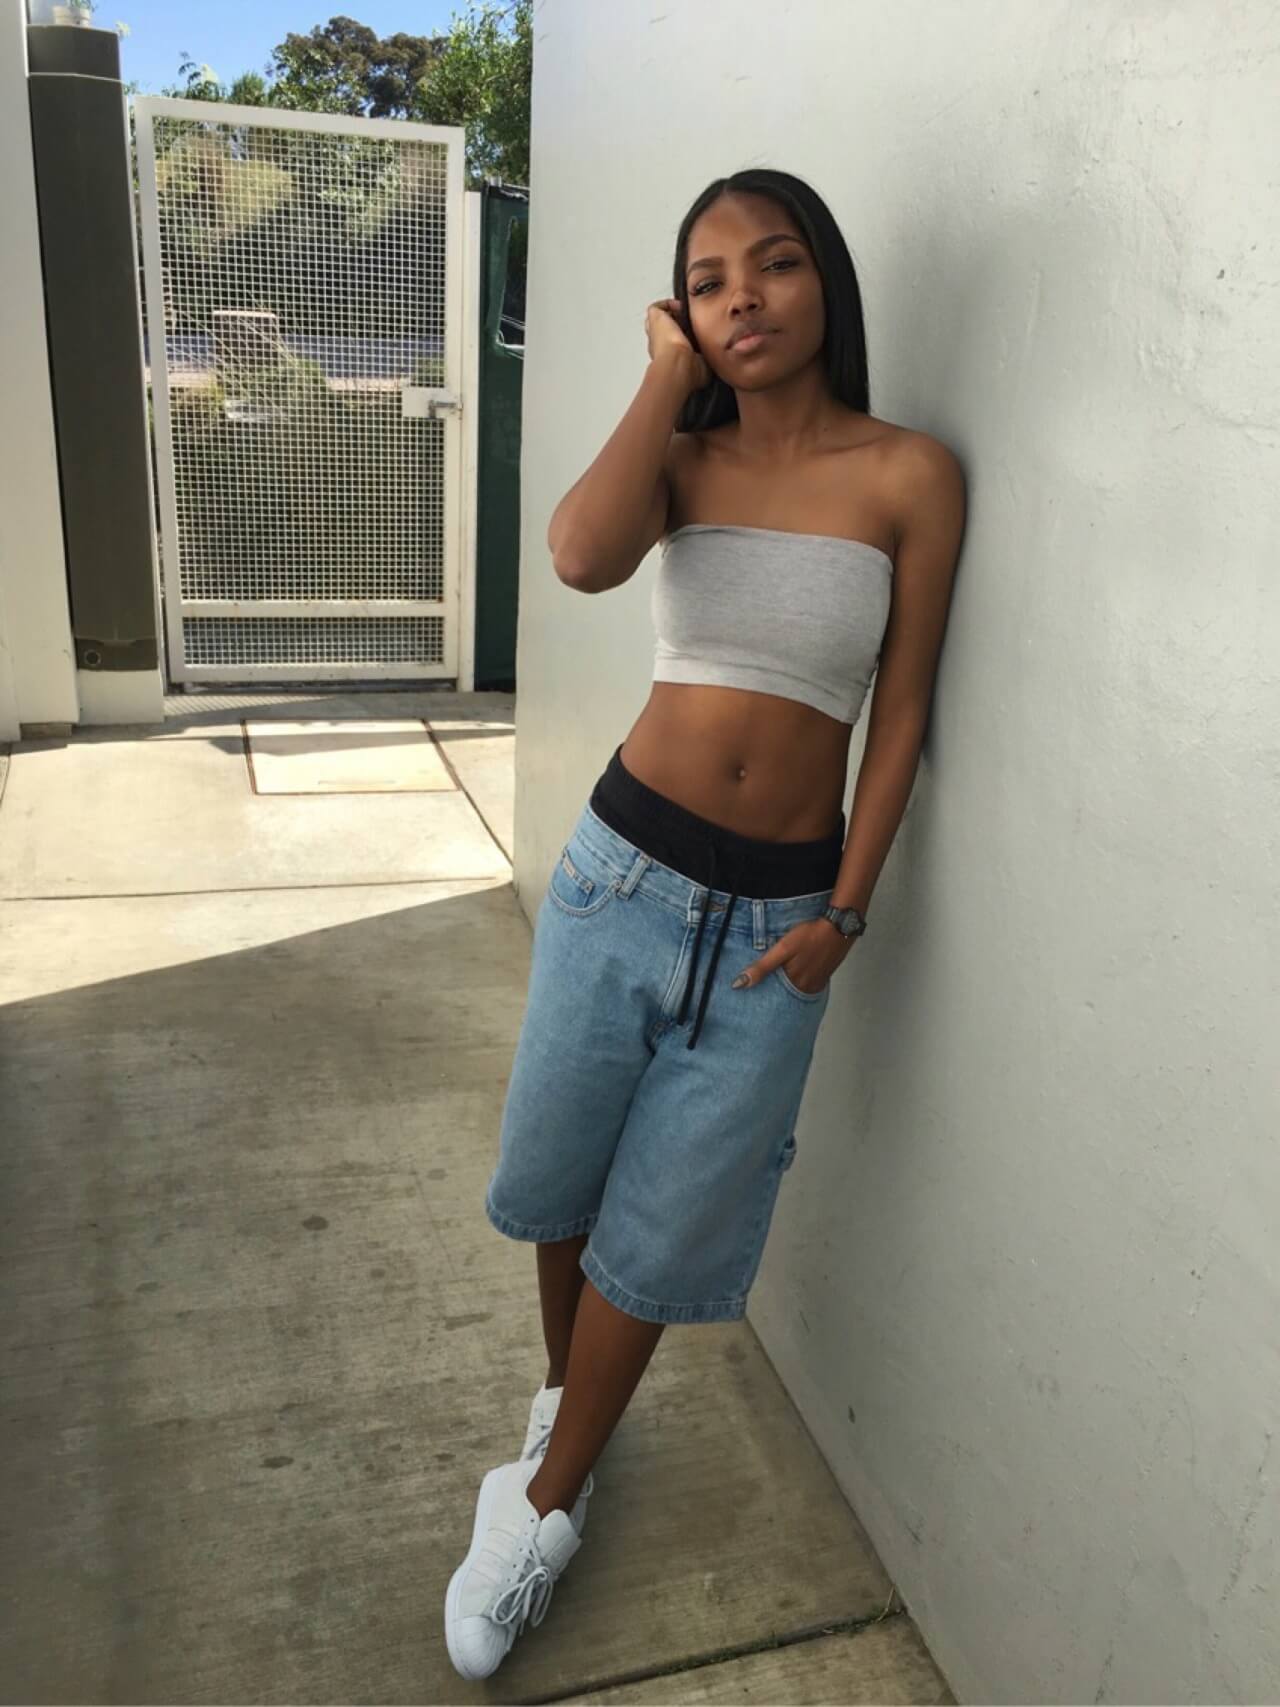 49 Hot Pictures Of Ryan Destiny That Will Make Your Day A Win | Best Of Comic Books